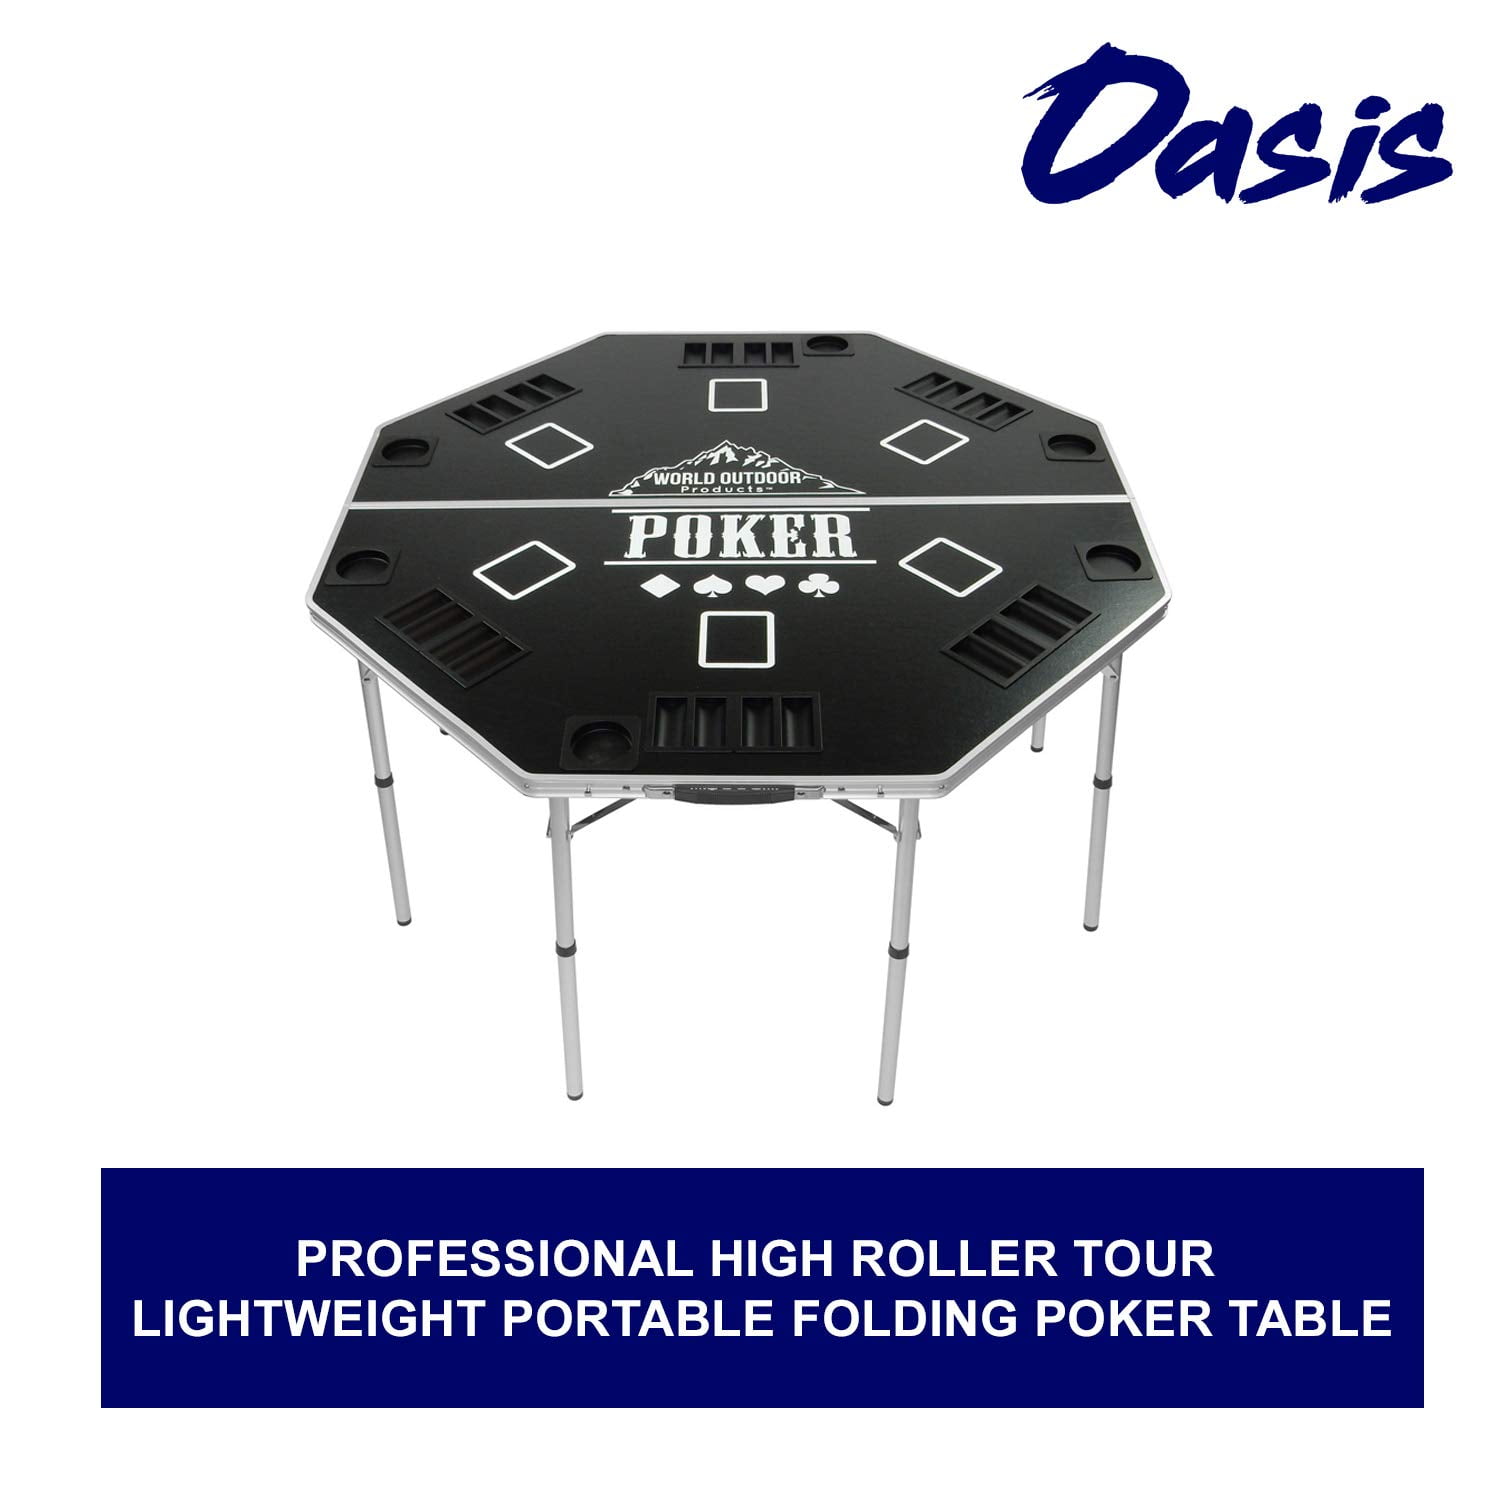 Oasis for 2019 Professional High Roller Tour Lightweight Portable 